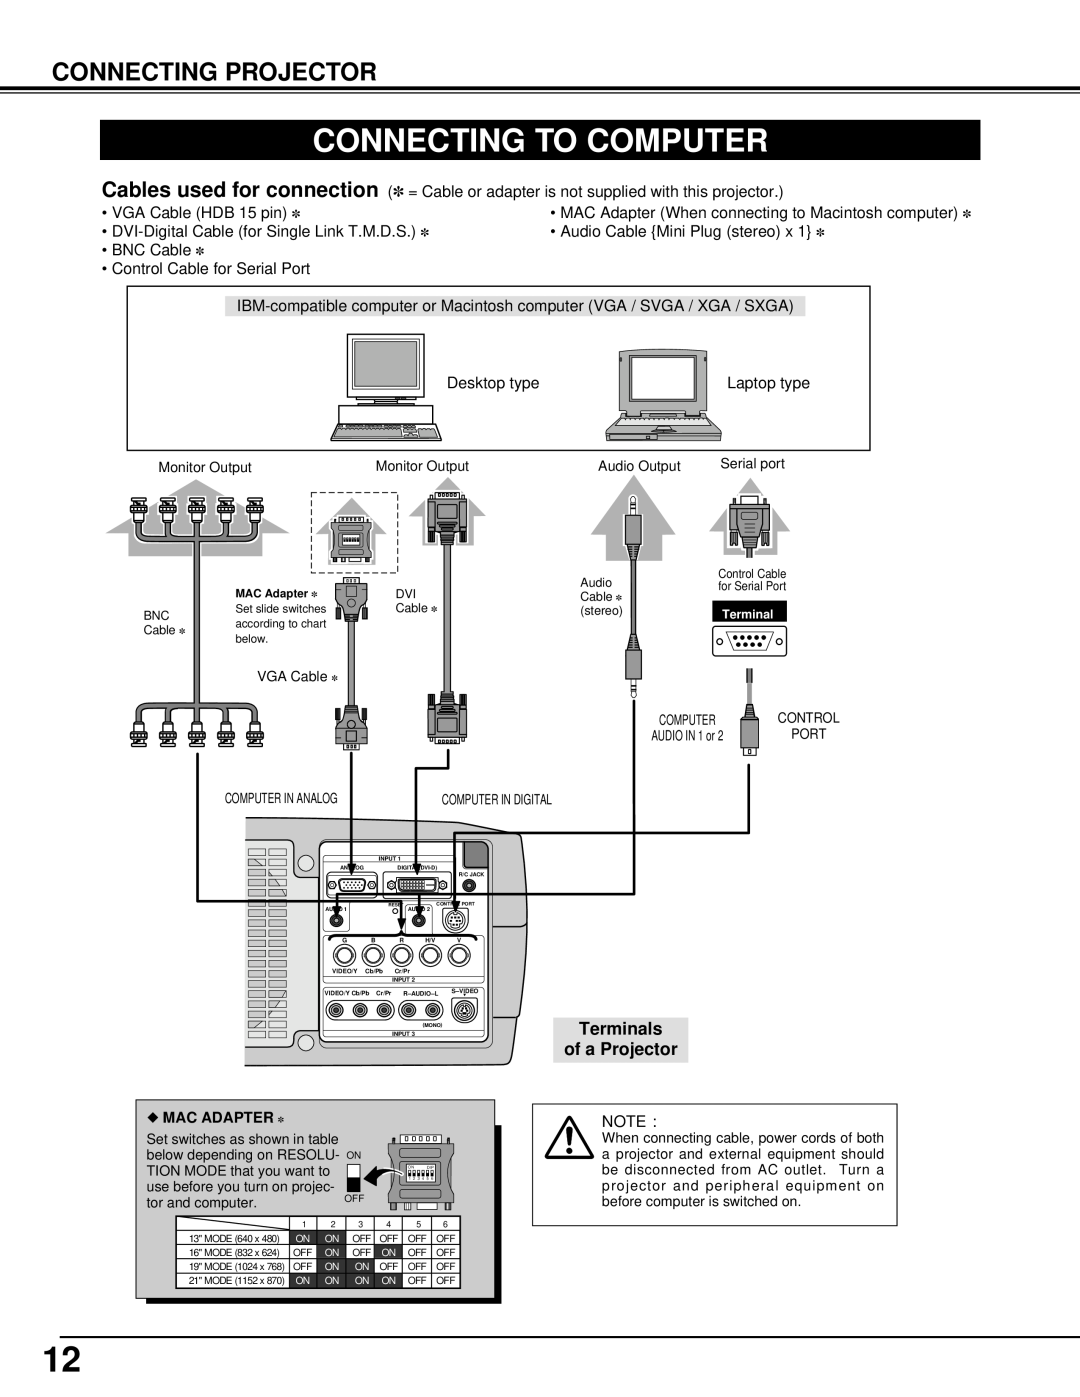 Sanyo PLV-70 owner manual Connecting To Computer, Connecting Projector, Terminals of a Projector 